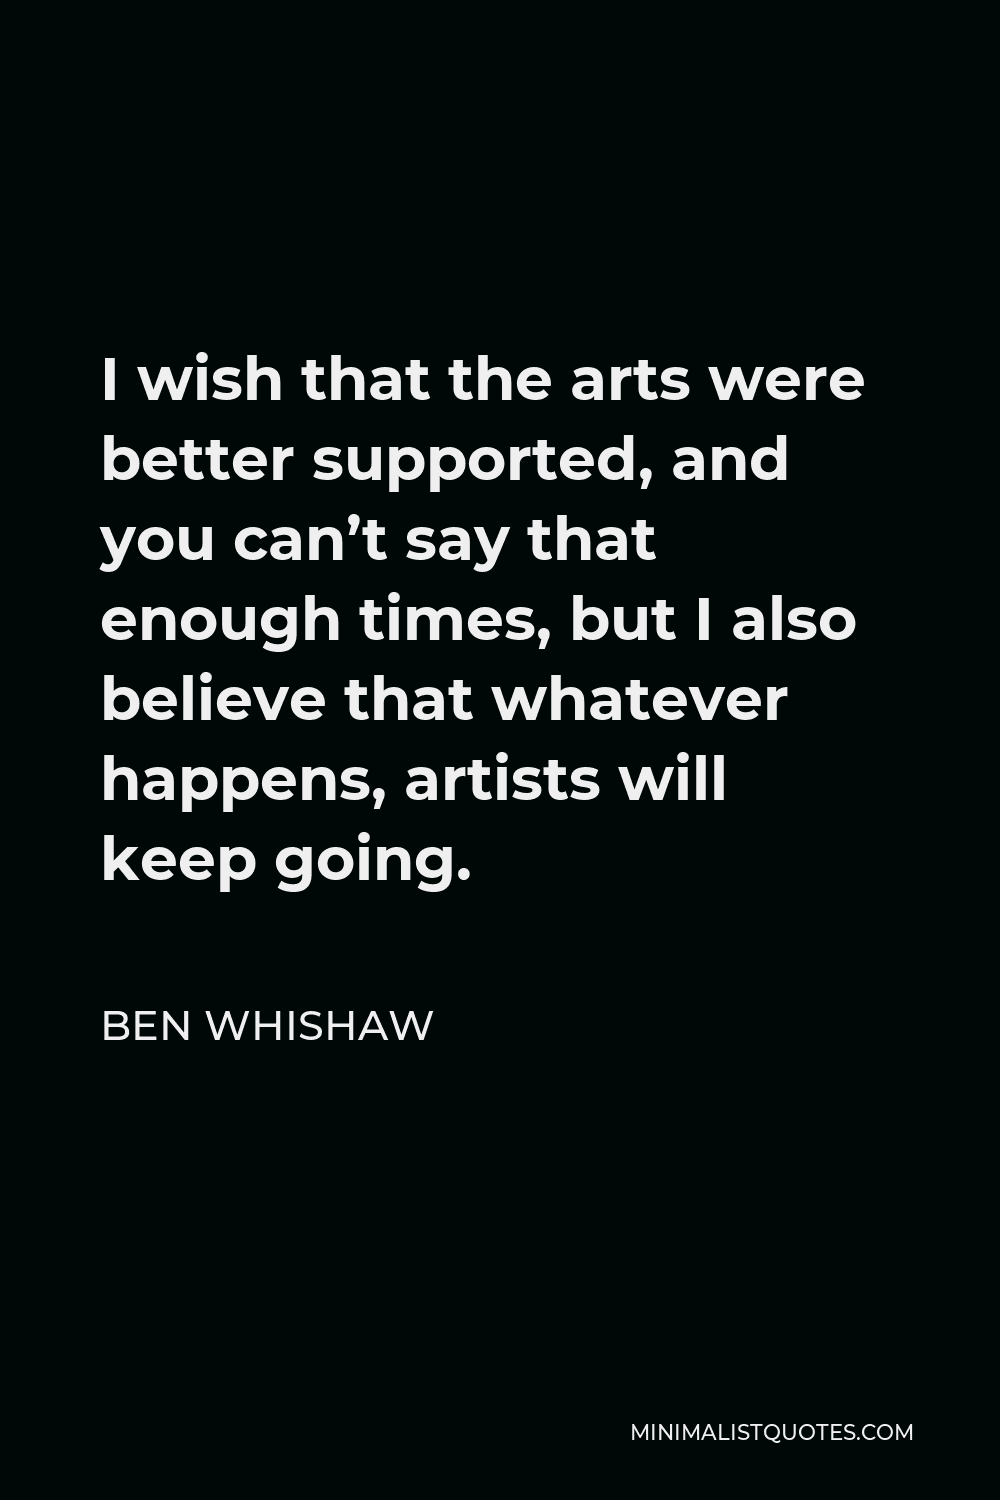 Ben Whishaw Quote - I wish that the arts were better supported, and you can’t say that enough times, but I also believe that whatever happens, artists will keep going.